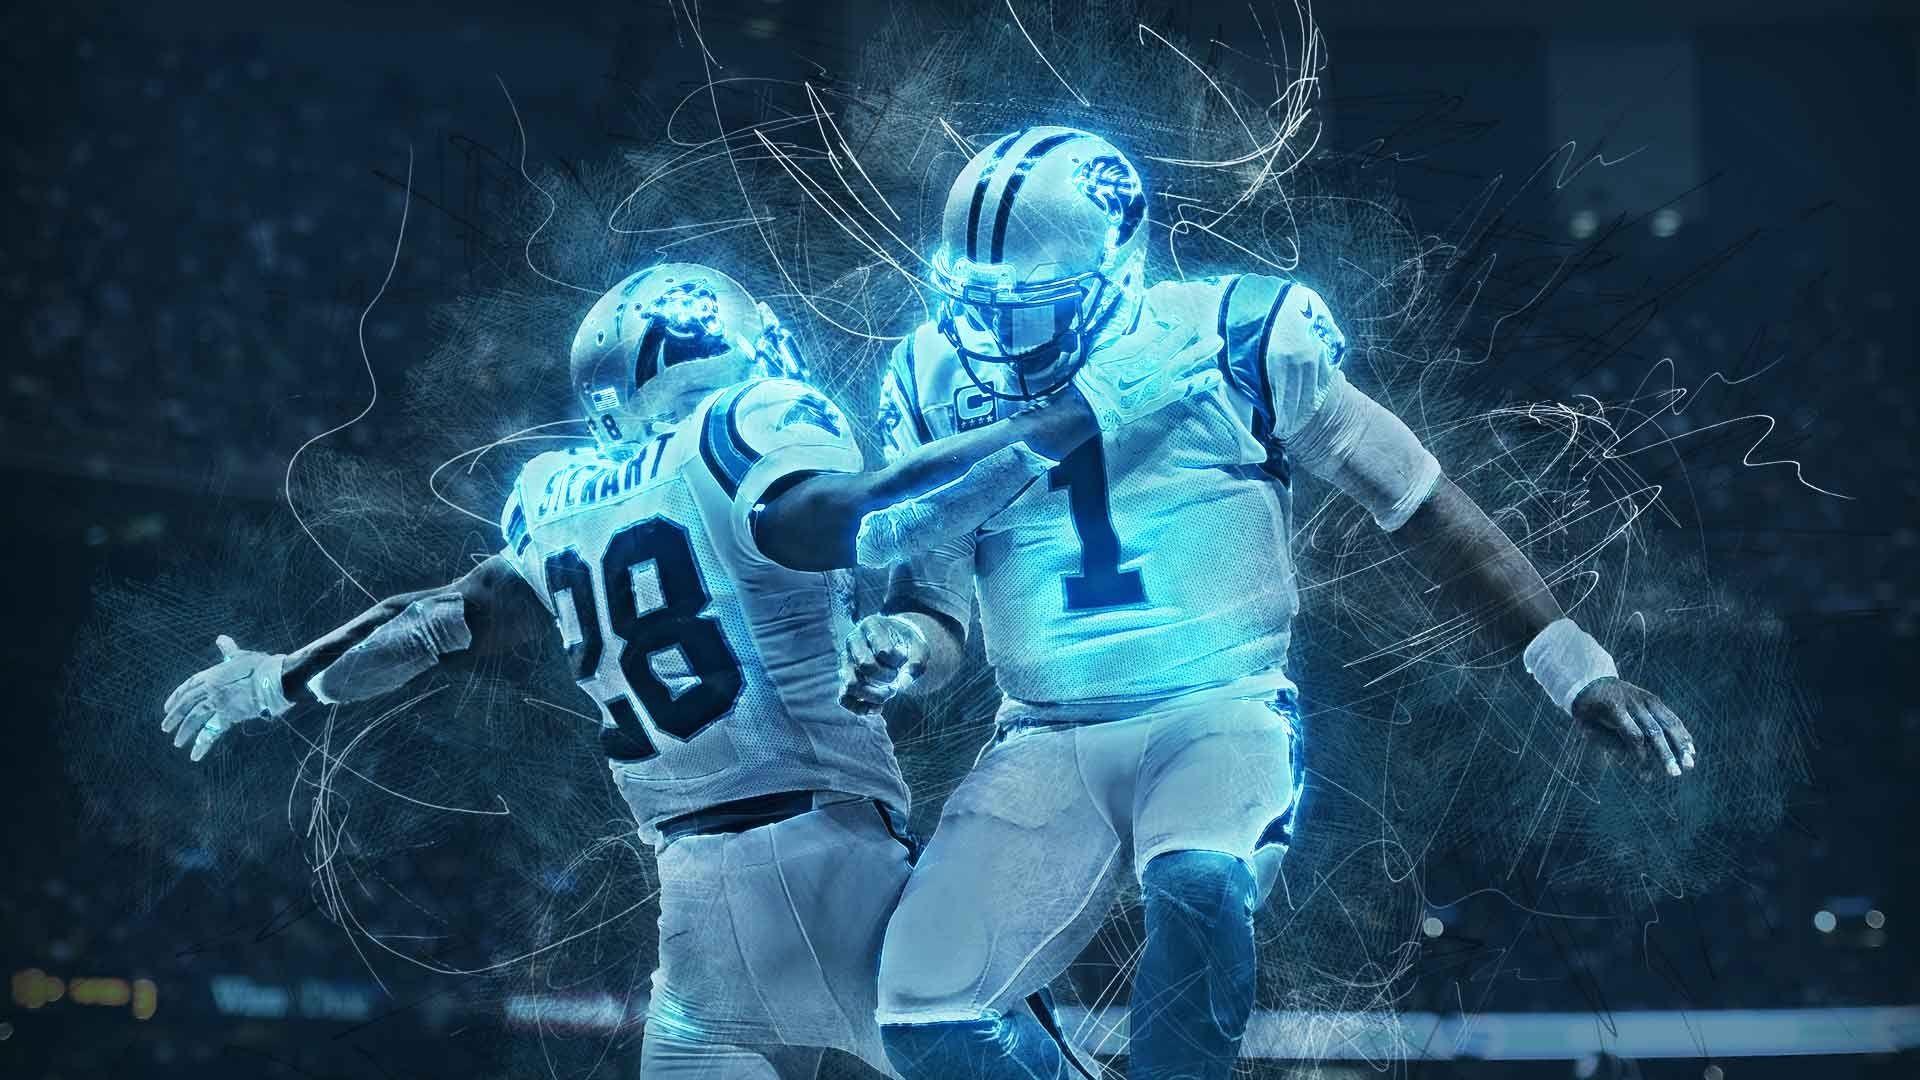 Wallpaper Of Cam Newton 74 images